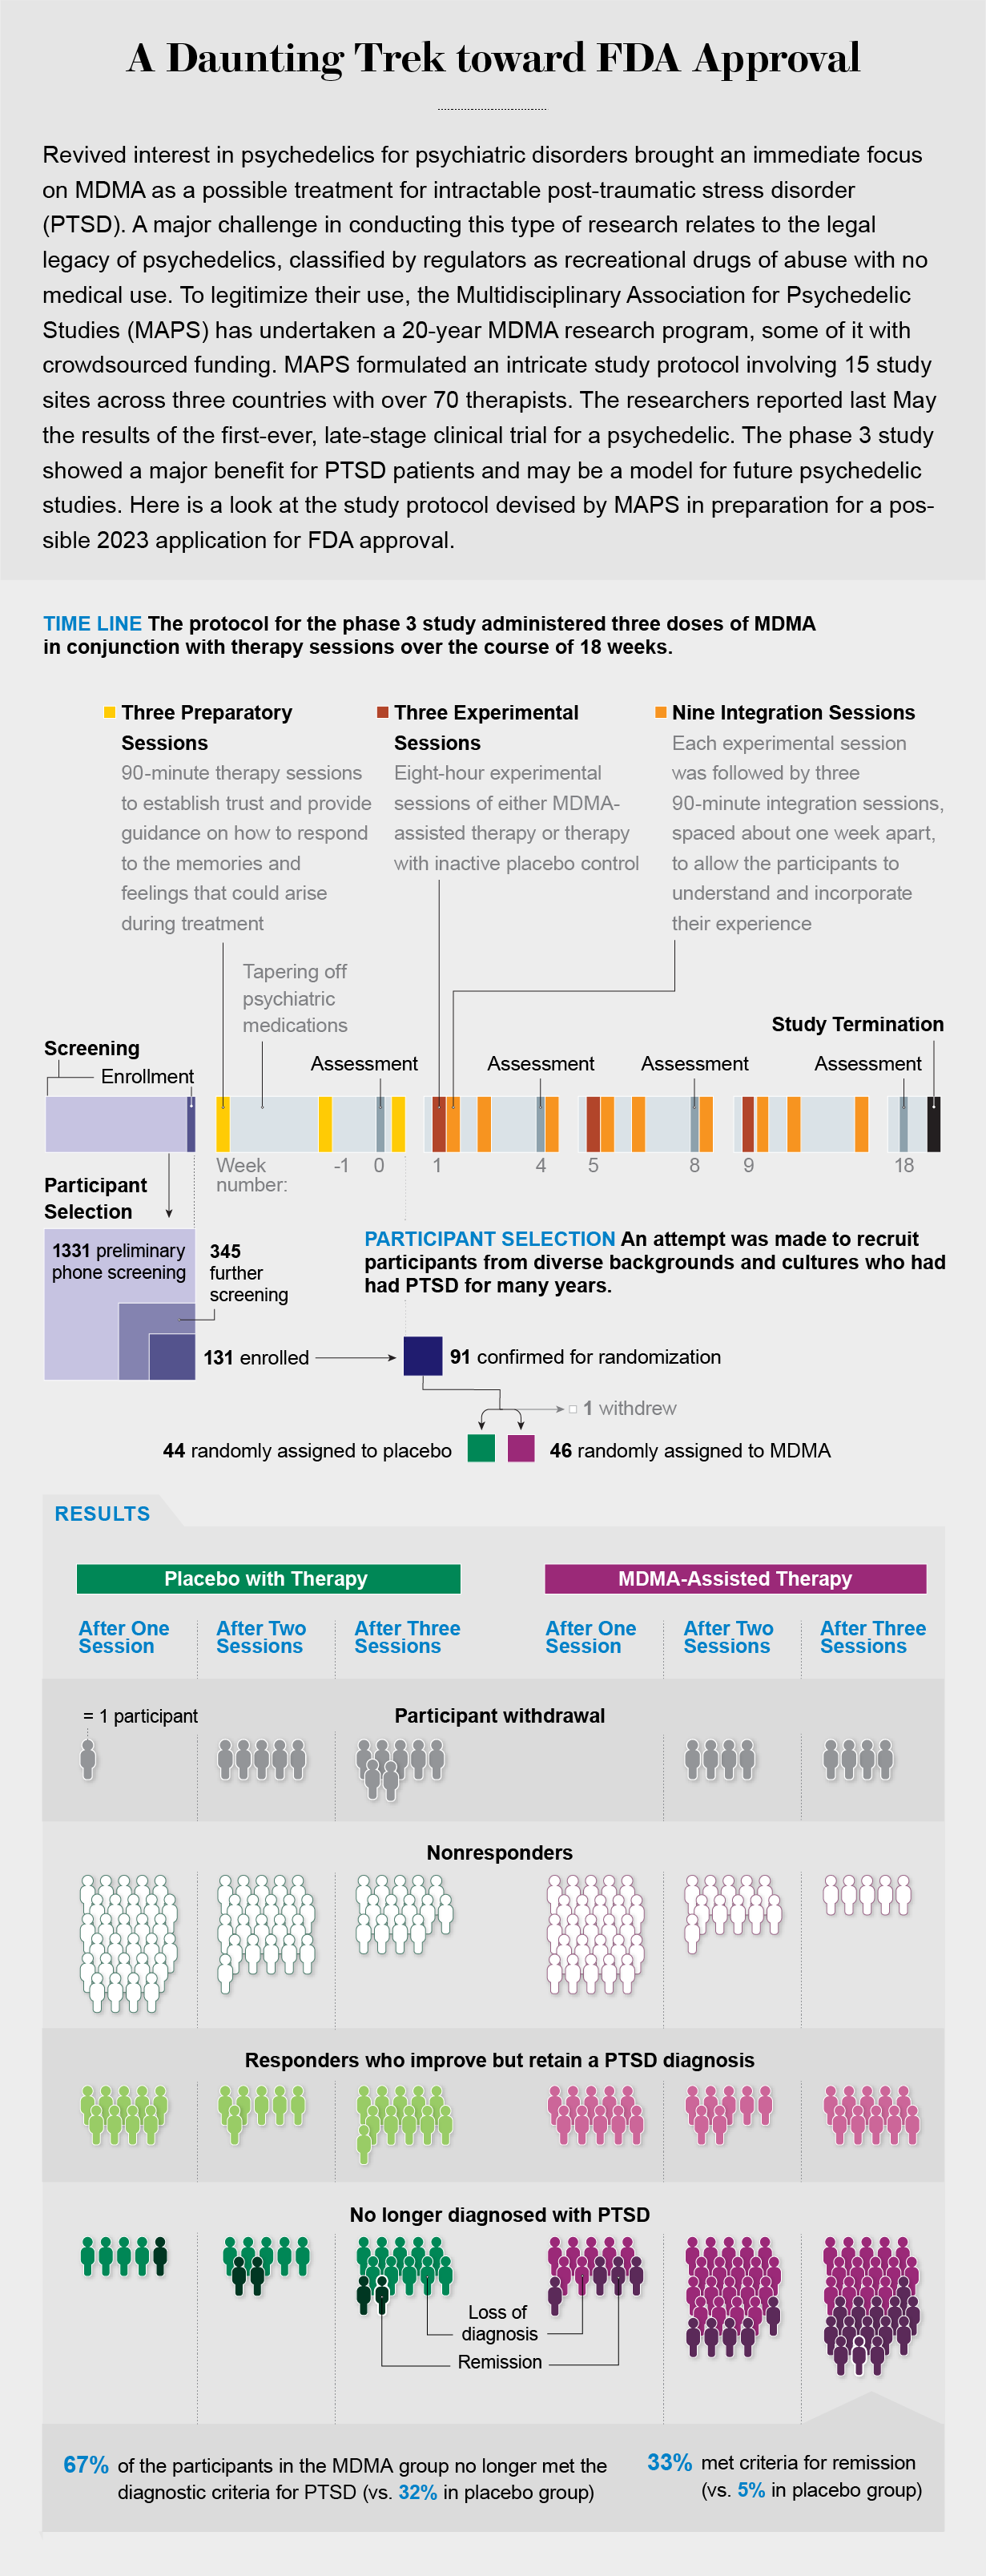 Graphic breaks down the process of the phase III study that found a major benefit in use of MDMA for patients with PTSD.